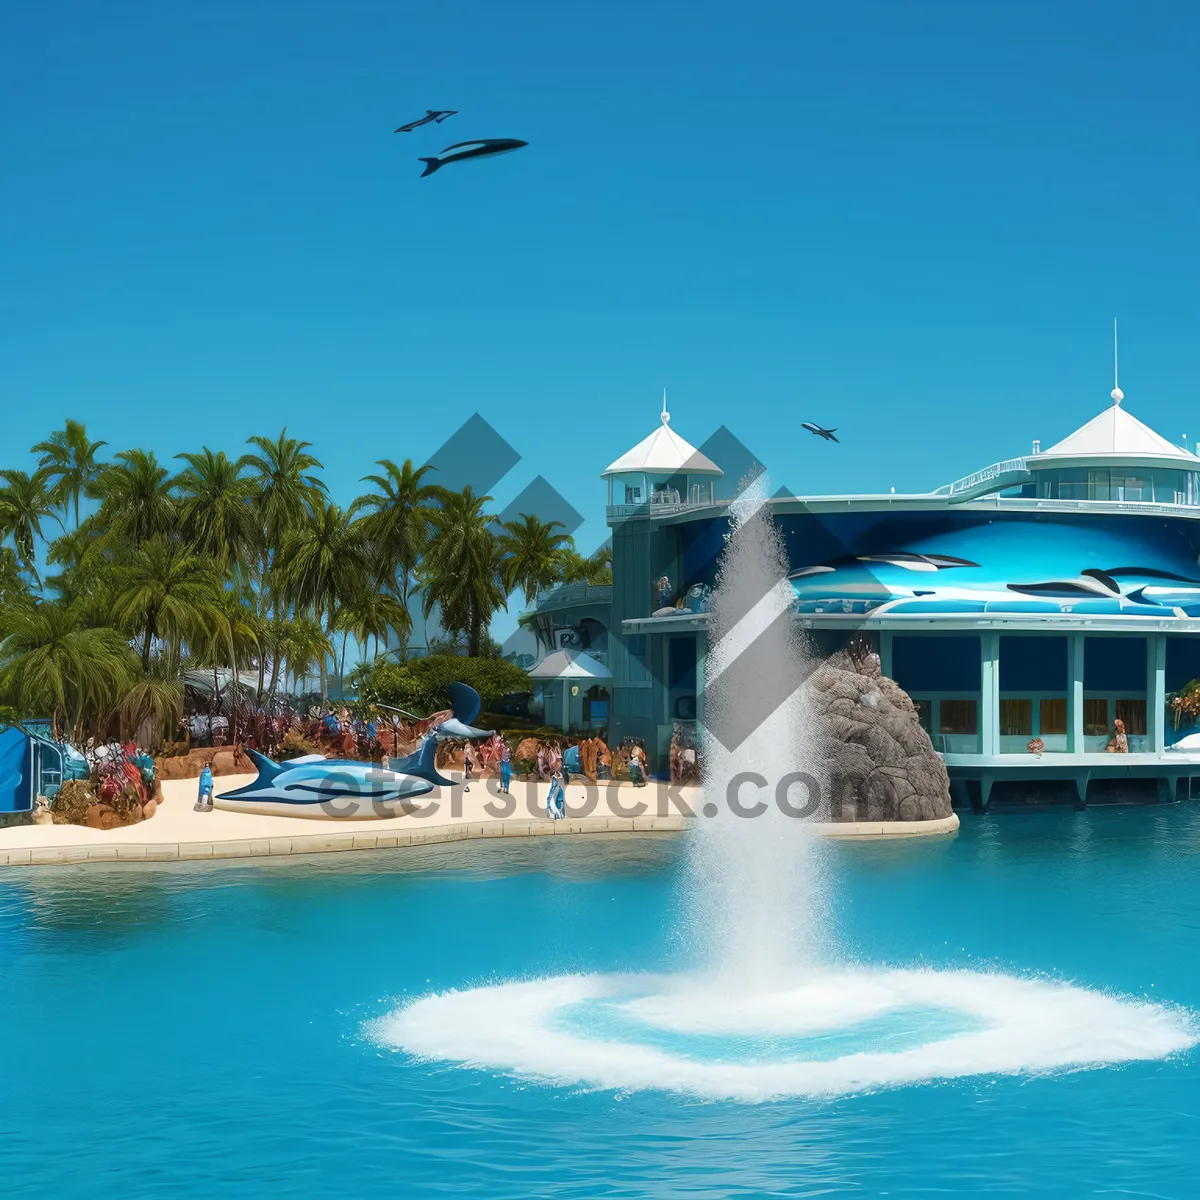 Picture of Tropical Paradise: Resort Hotel with Beautiful Waterfall and Pool